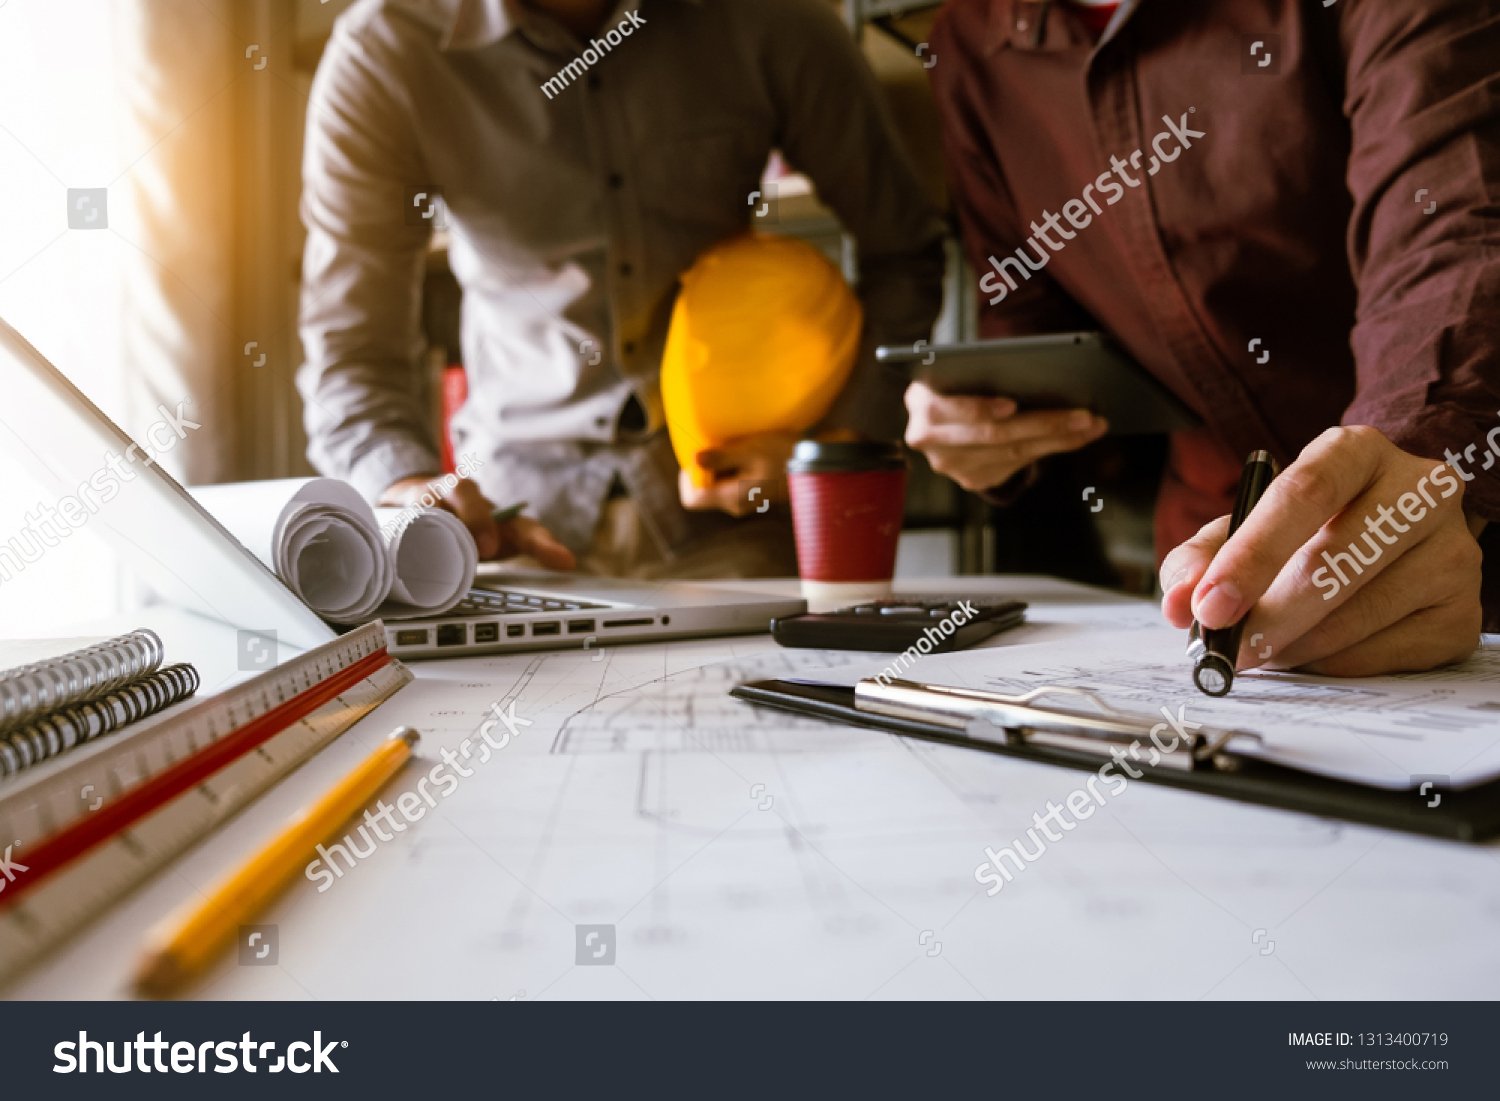 stock-photo-two-colleagues-discussing-data-working-and-tablet-laptop-with-on-on-architectural-project-at-1313400719